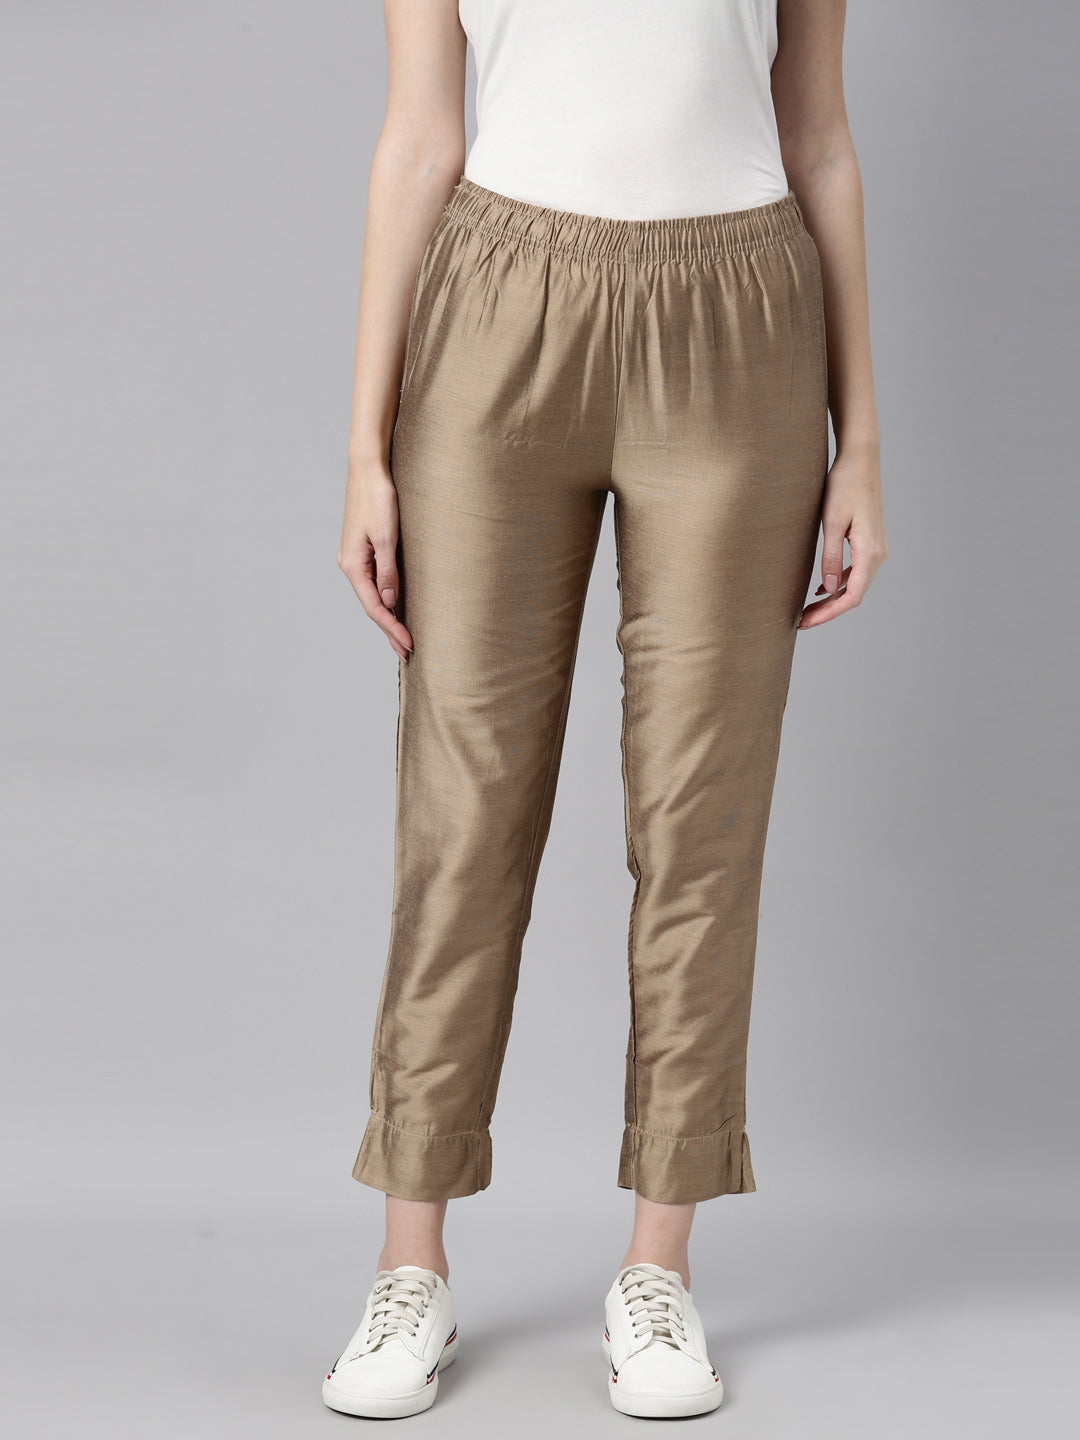 Khaki Solid Cotton Women Tapered Fit Pants - Selling Fast at Pantaloons.com